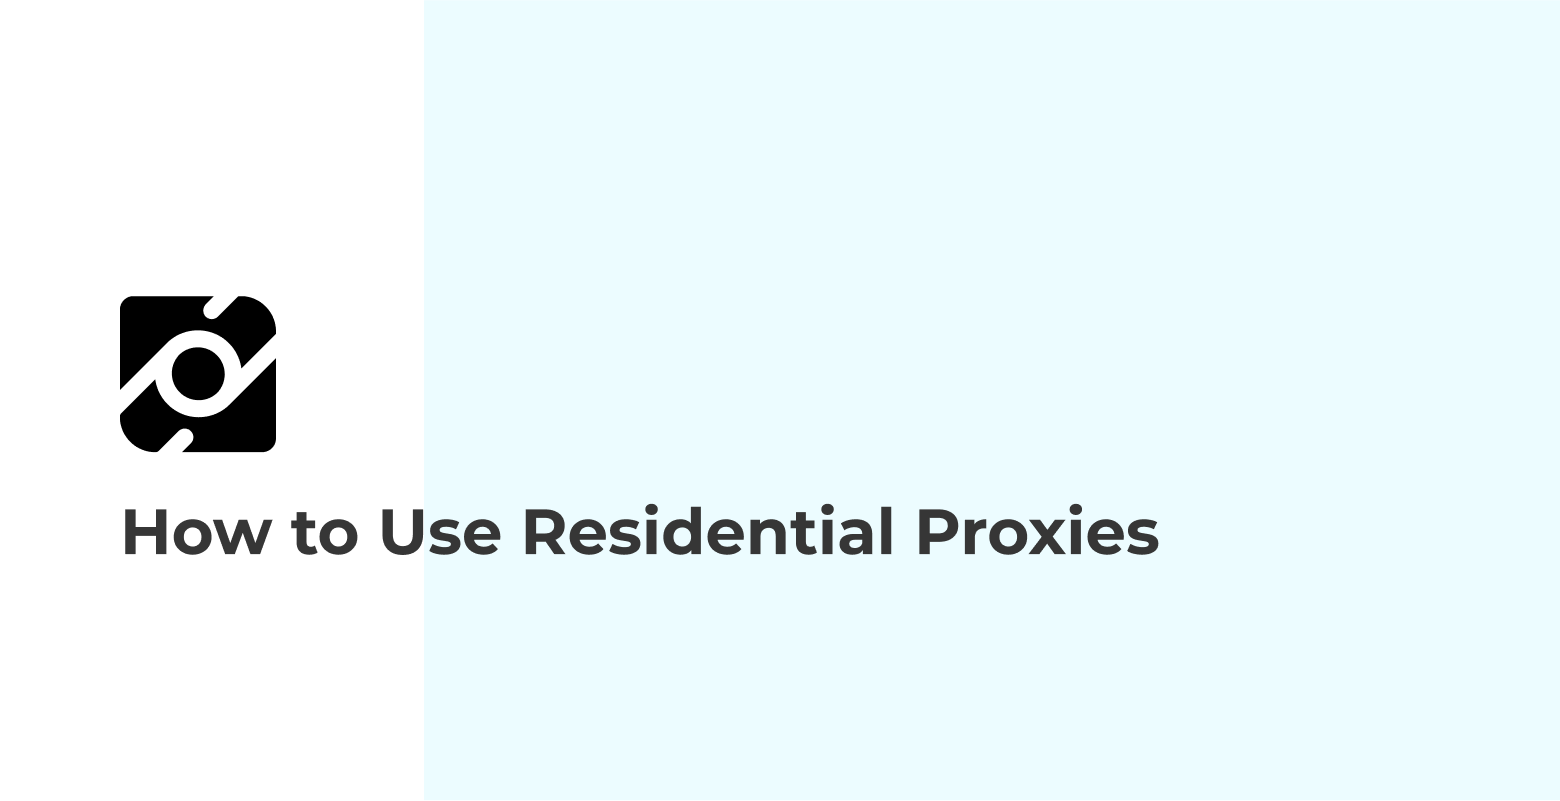 How to Use Residential Proxies